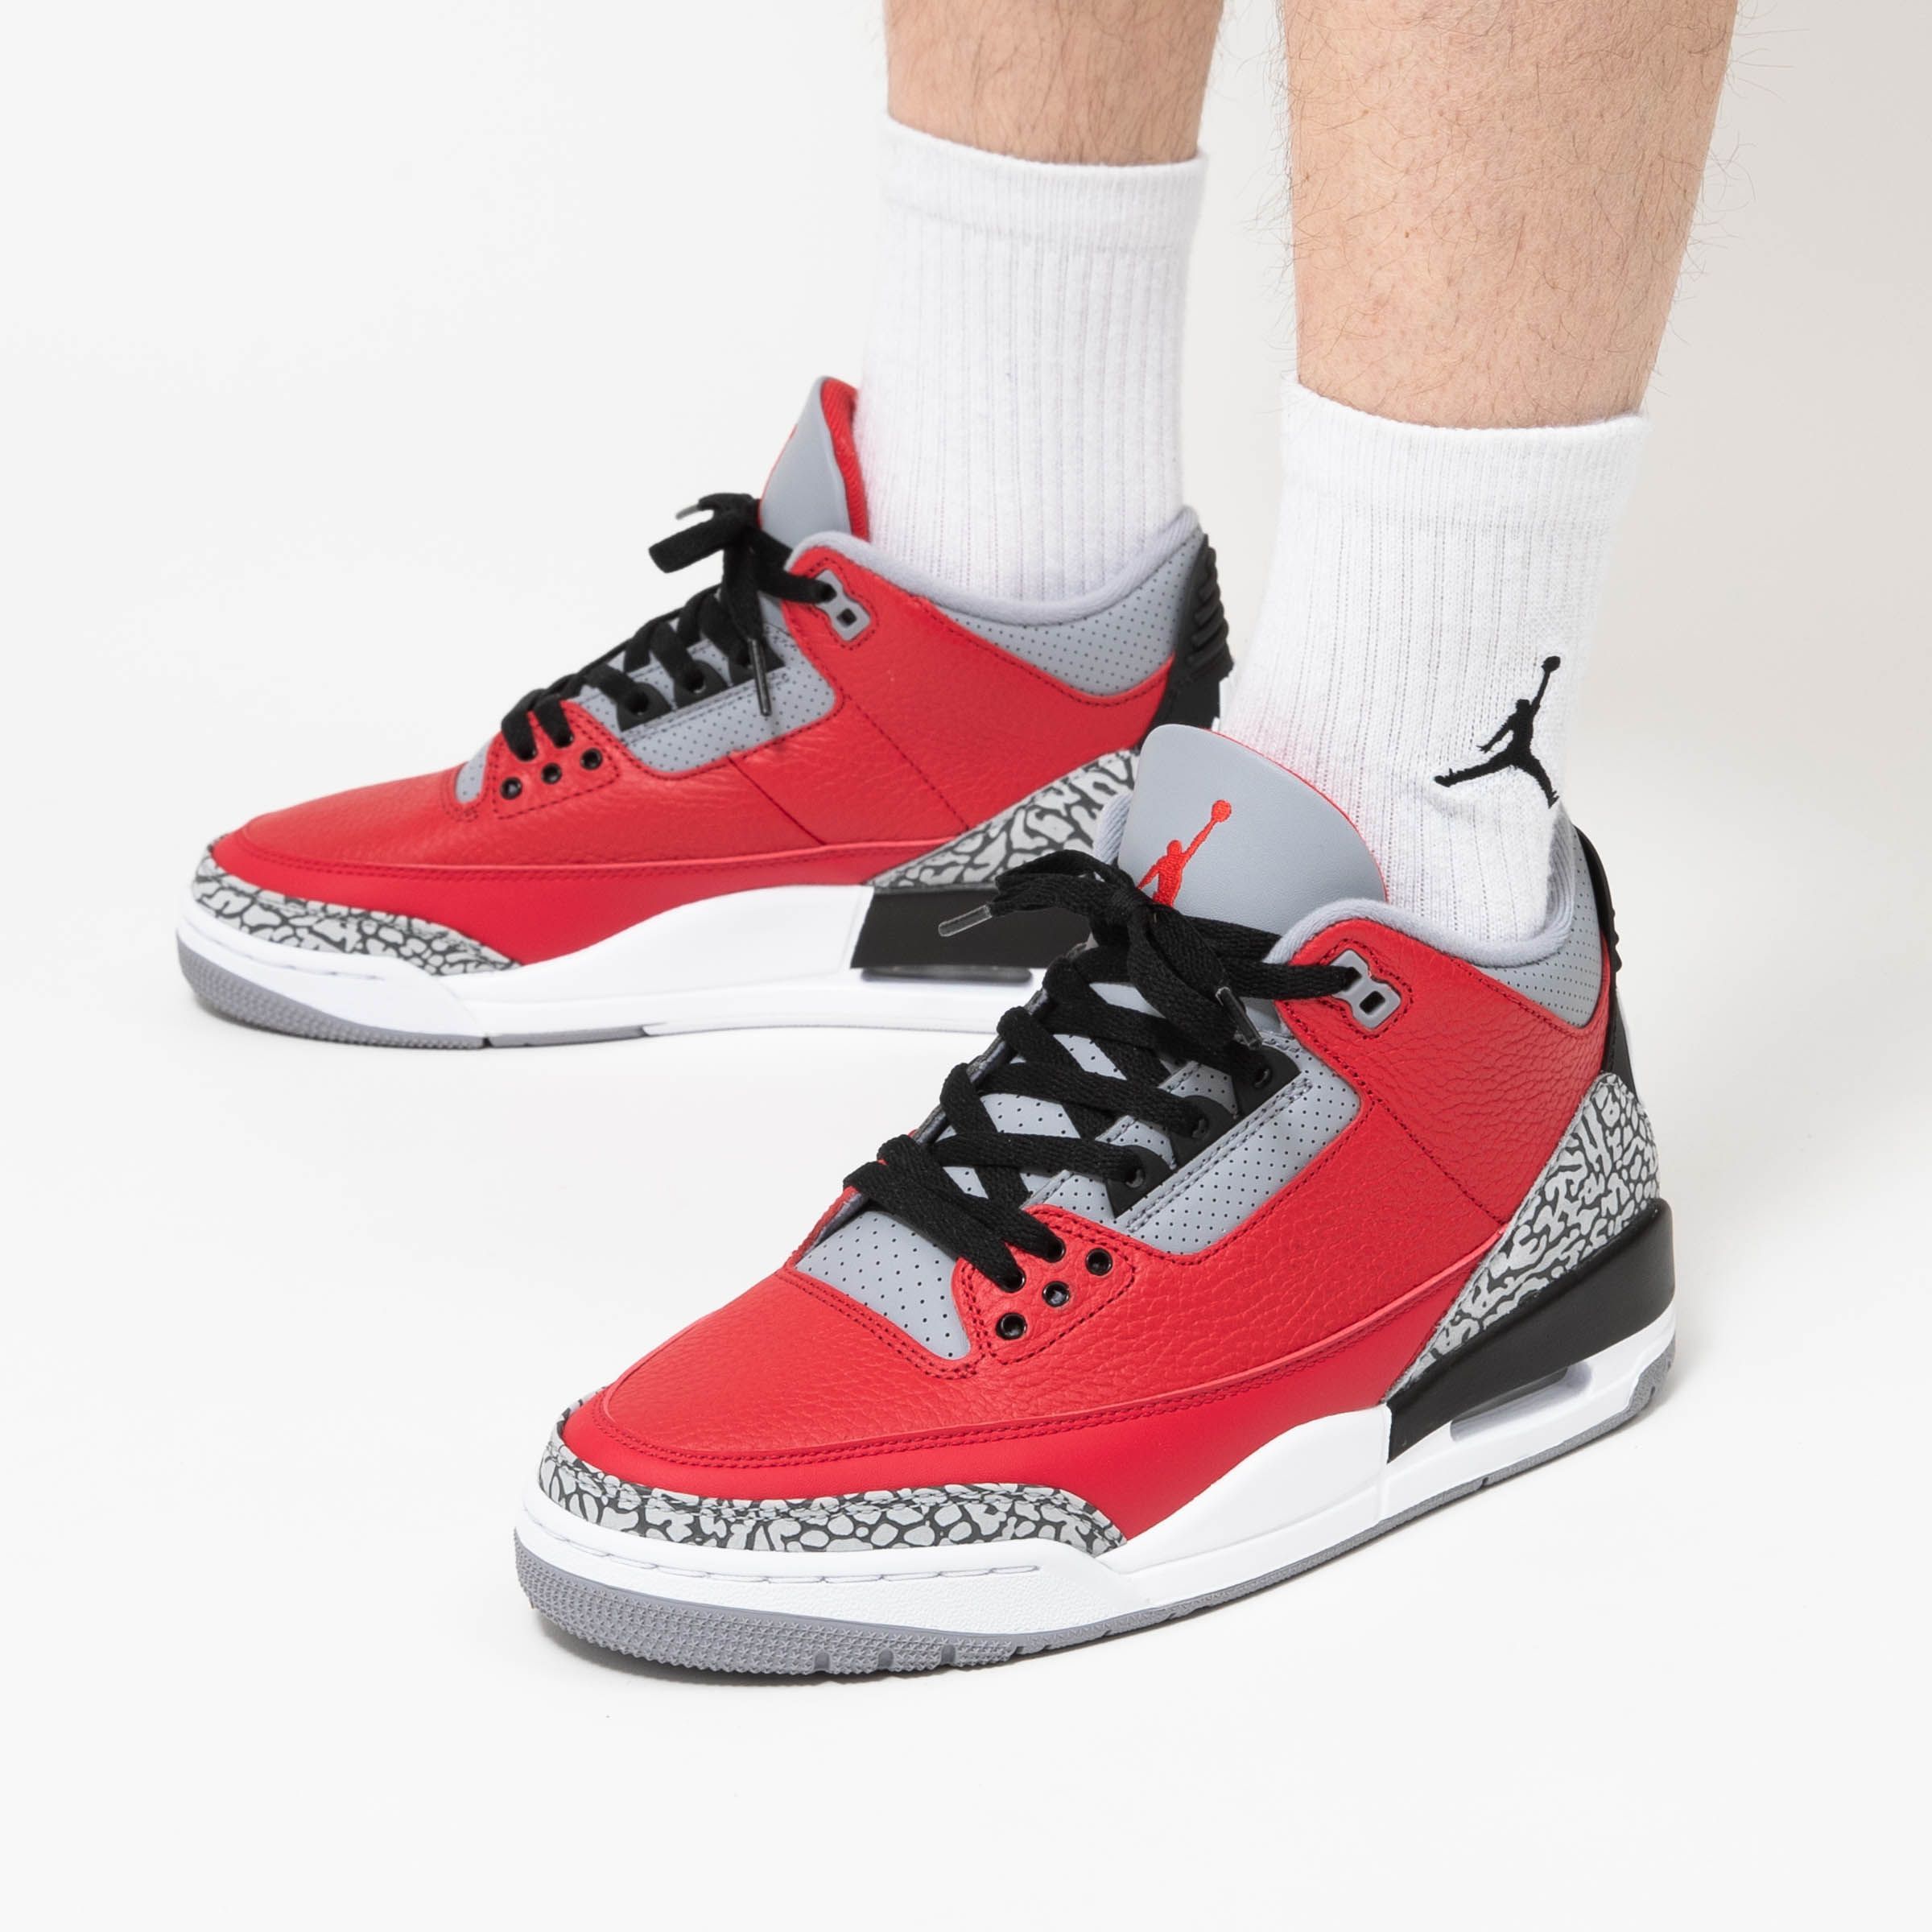 éxito Subtropical Cercanamente Titolo on Twitter: "#outNOW🔥 Air Jordan 3 Retro Special Edition "Fire Red"  S h o p ➡️ https://t.co/3nMnAFMrmy #aj3 #airjordan3 #jordan #firered  https://t.co/juA1UNHavJ" / Twitter